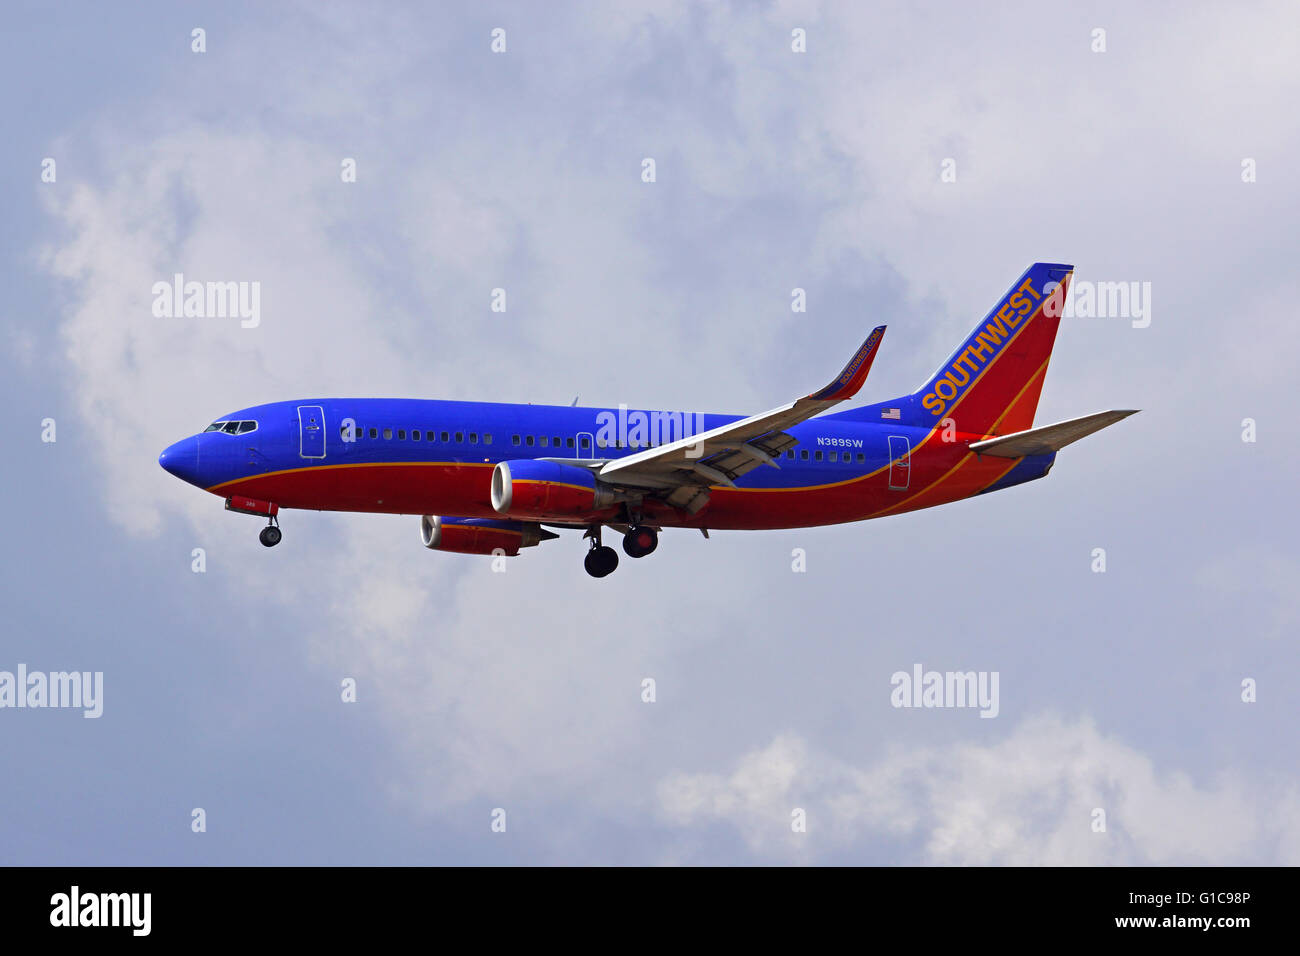 Commercial Southwest Airlines jumbo jet airplane landing at Ontario International Airport, outside of Los Angeles, California Stock Photo